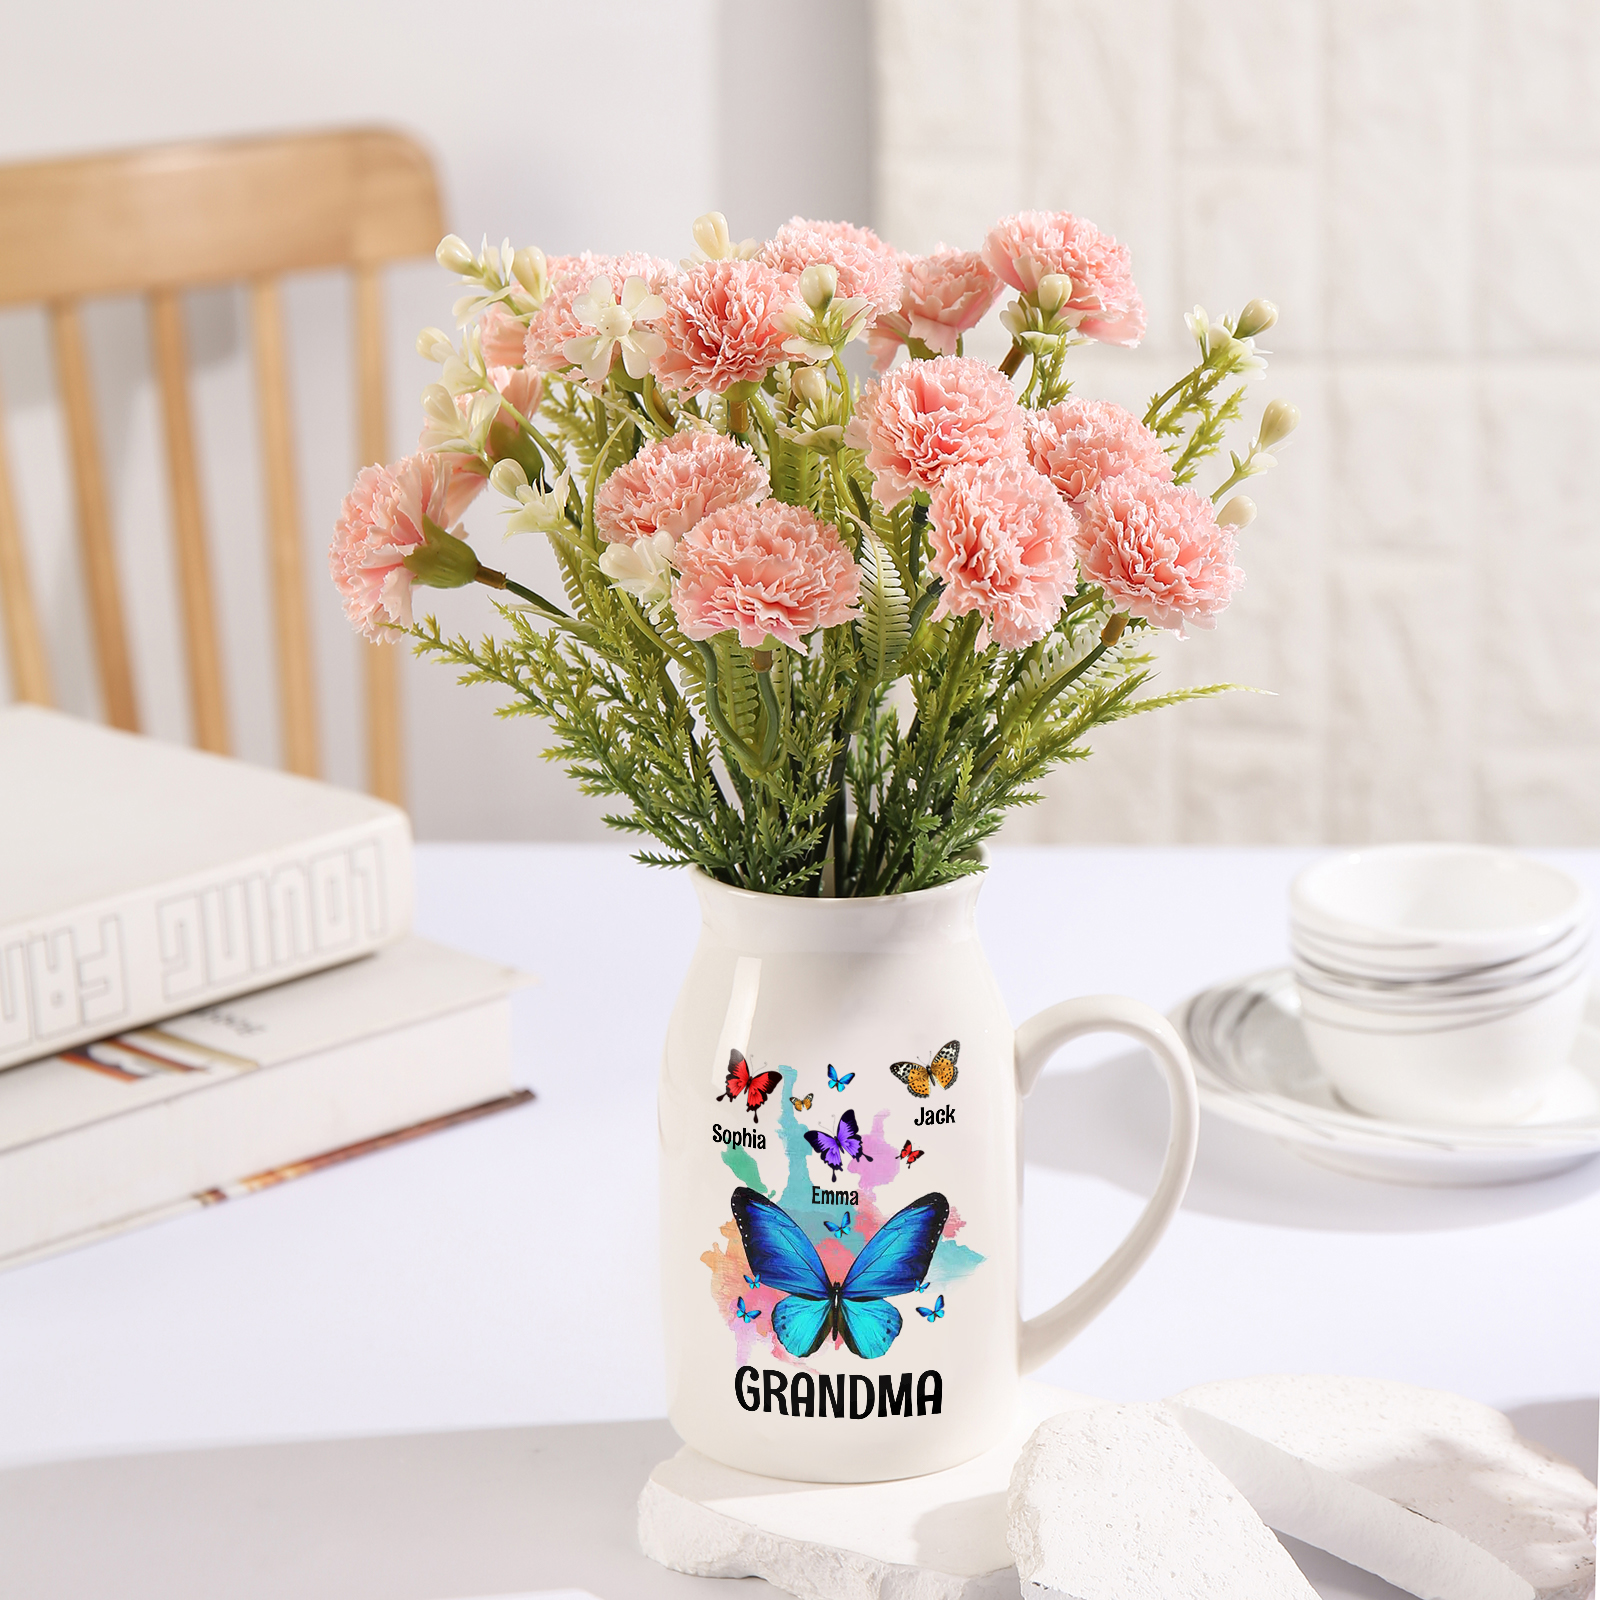 3 Names - Personalized Beautiful Colorful Butterfly Style Ceramic Vase with Customizable Names As a Wonderful Gift For Grandma